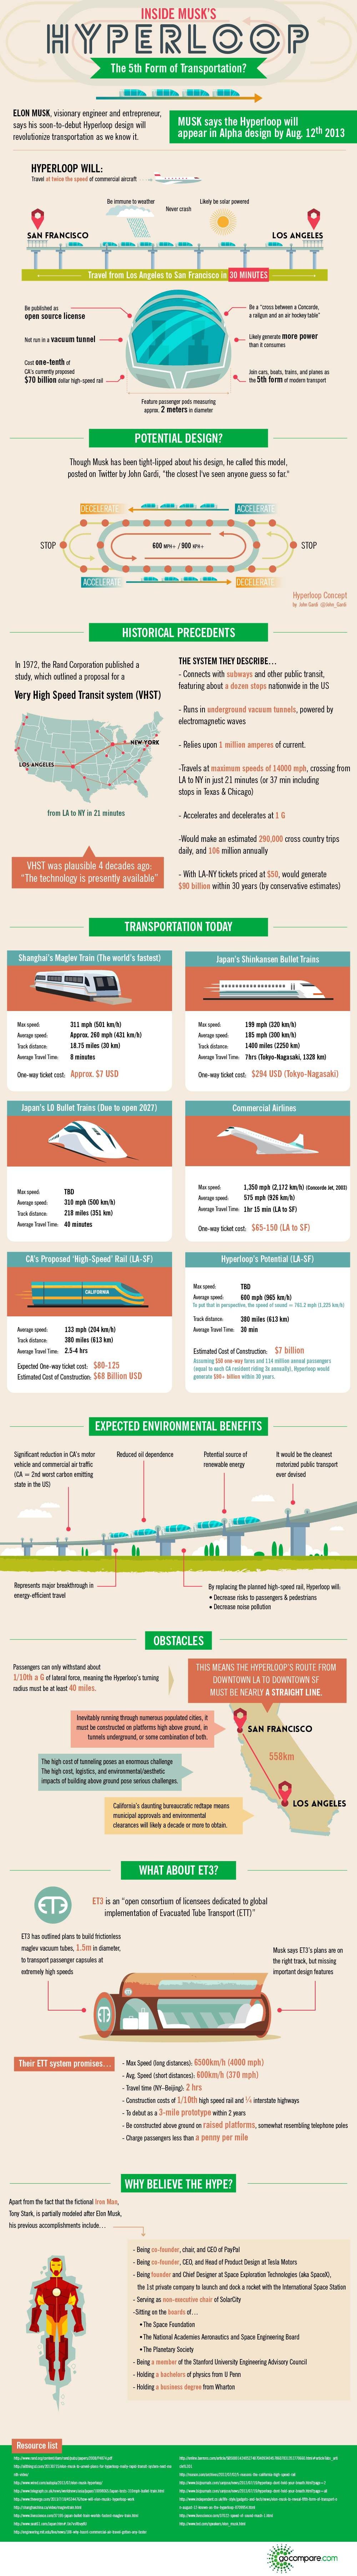 Train Transportation Growth and Technologies